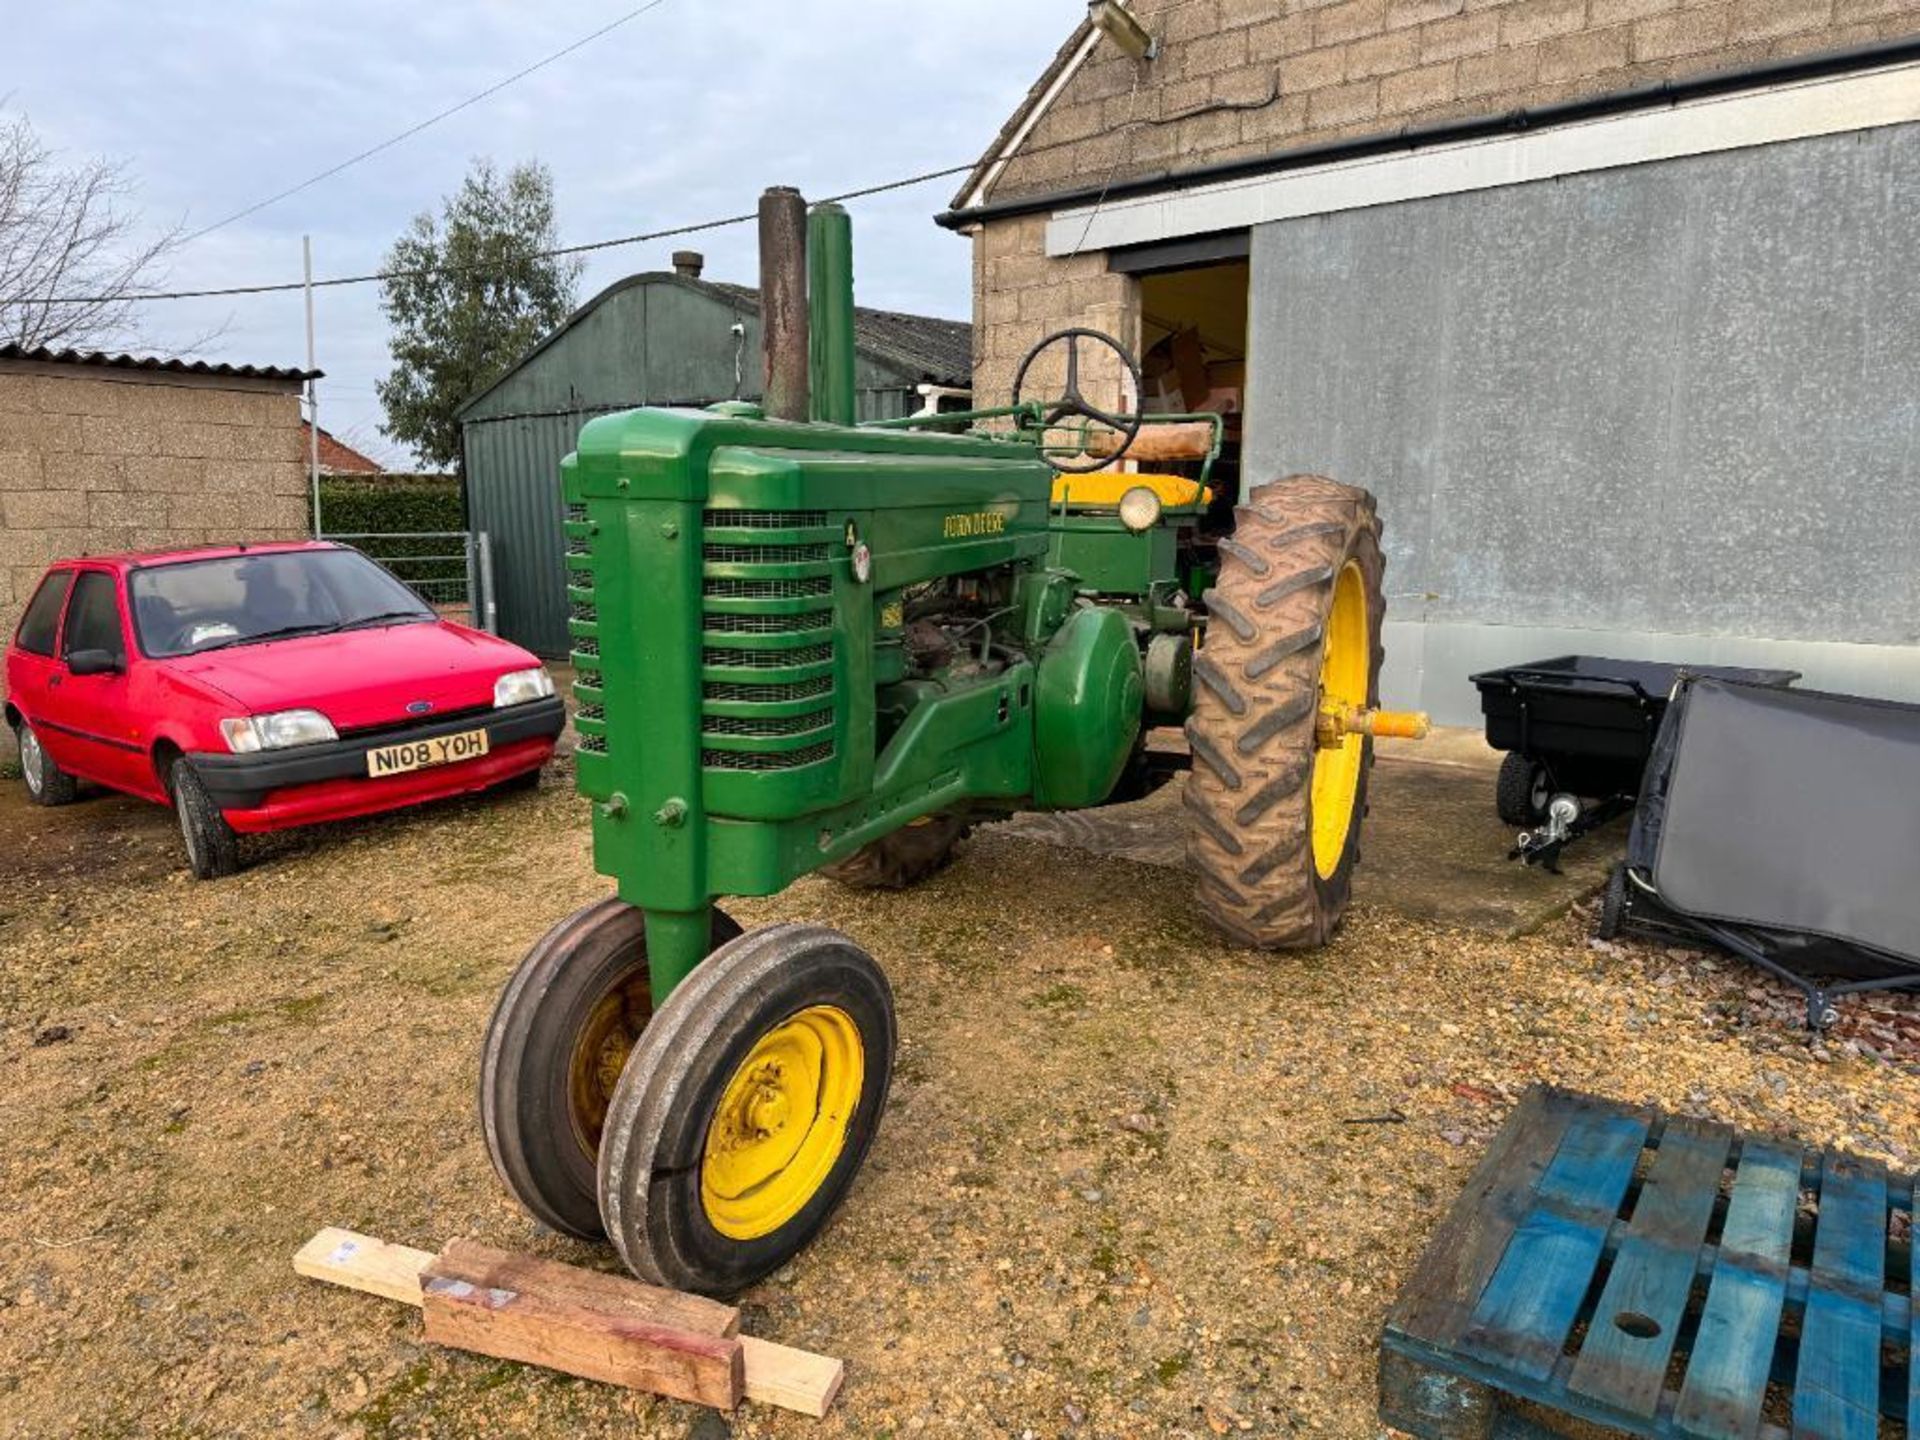 1948 John Deere Model A row crop tractor with side belt pulley, rear PTO and drawbar and twin front - Image 3 of 15